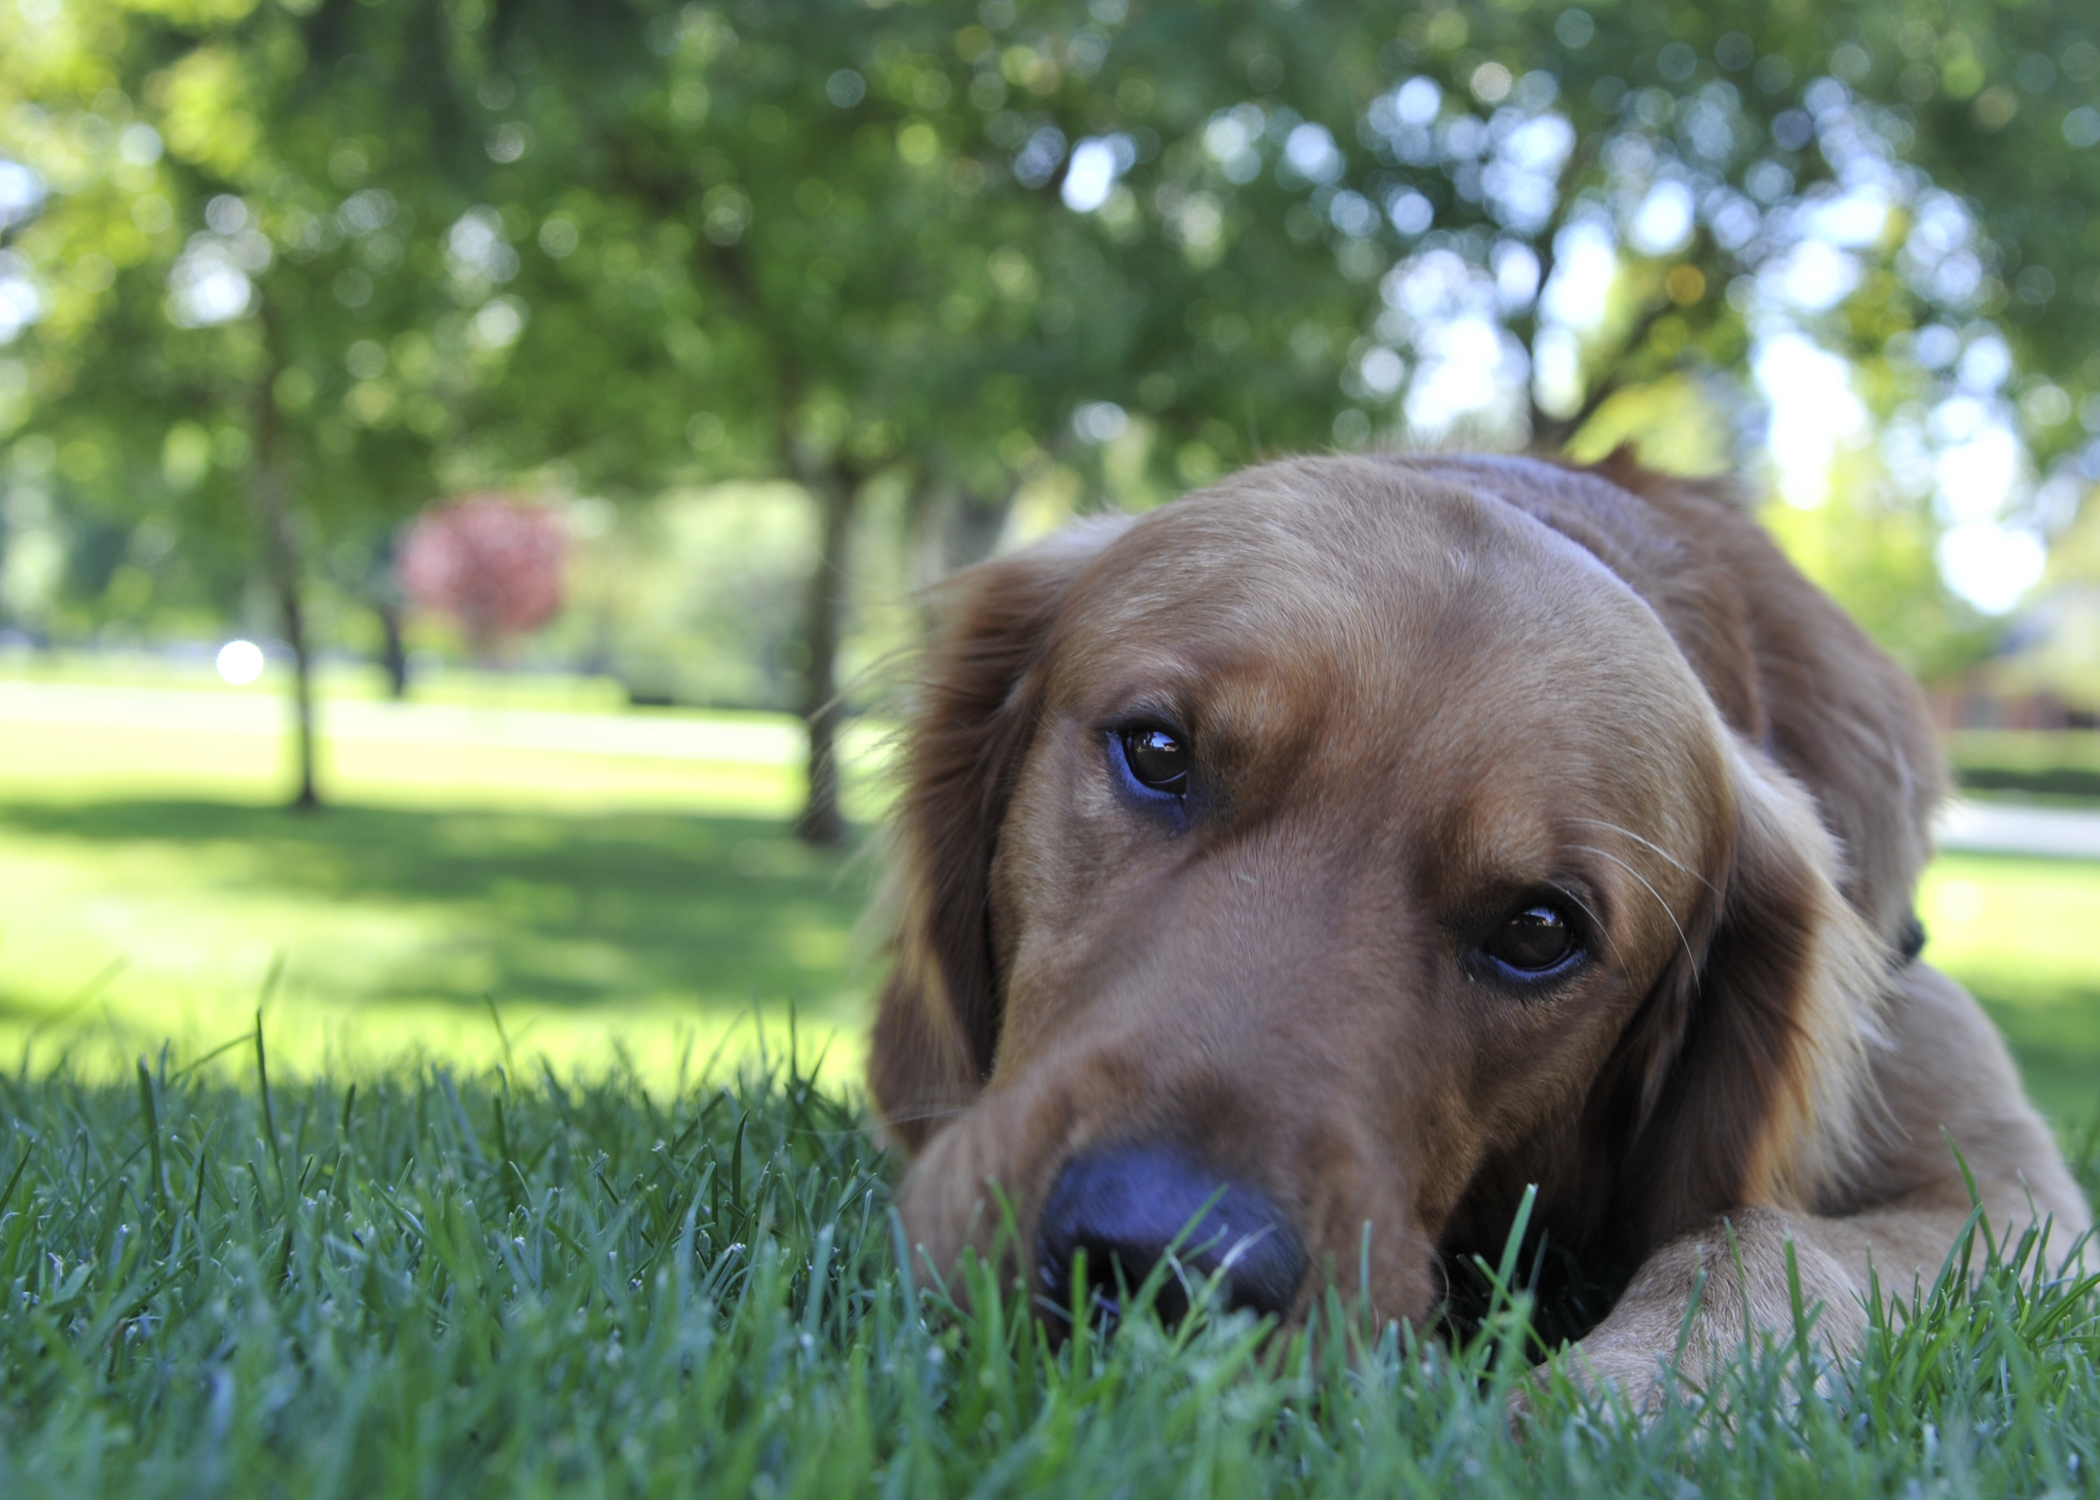 How to Keep Your Pet Safe During COVID-19 in Salt Lake City